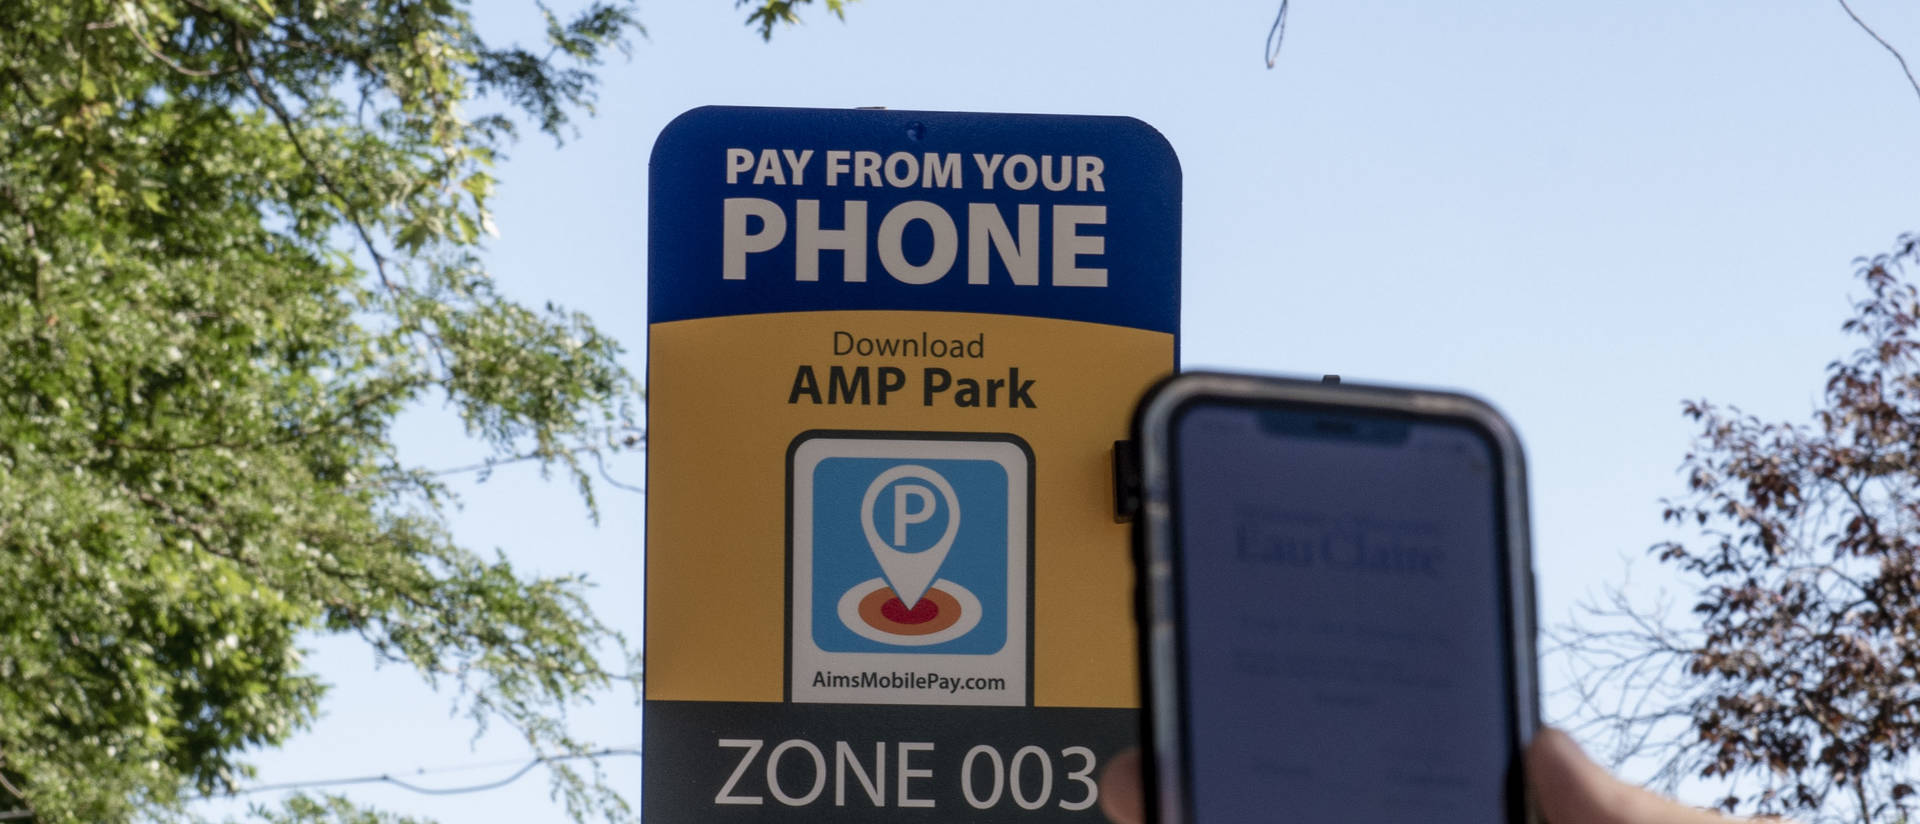 Drivers at UW-Eau Claire can ditch their coins and now pay for timed parking with the use of a mobile app.